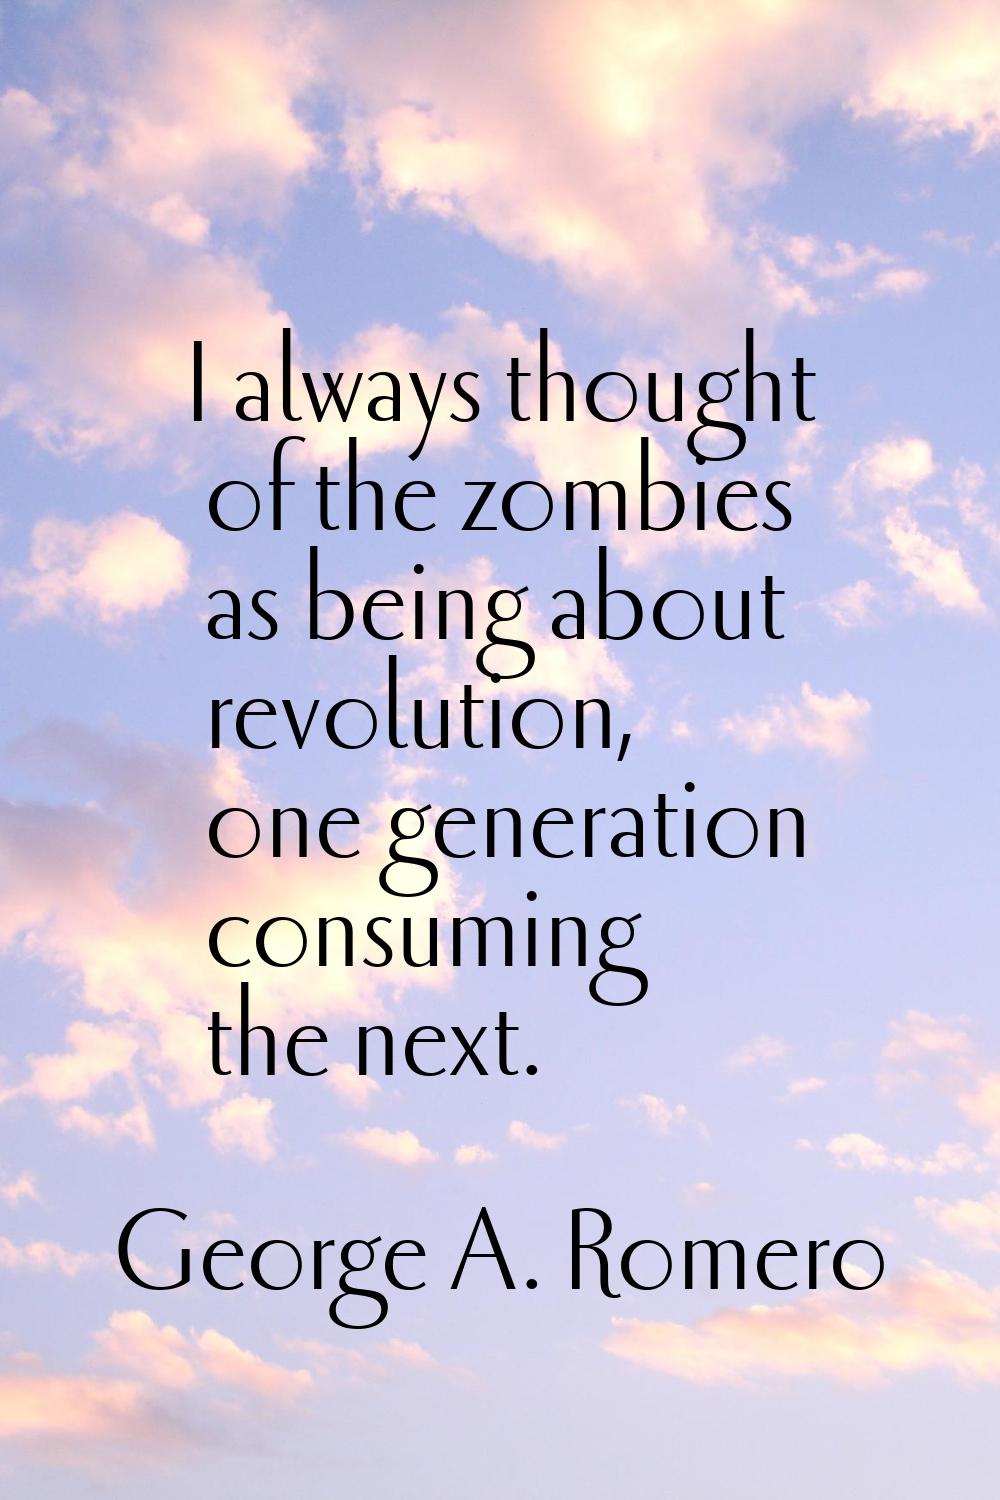 I always thought of the zombies as being about revolution, one generation consuming the next.